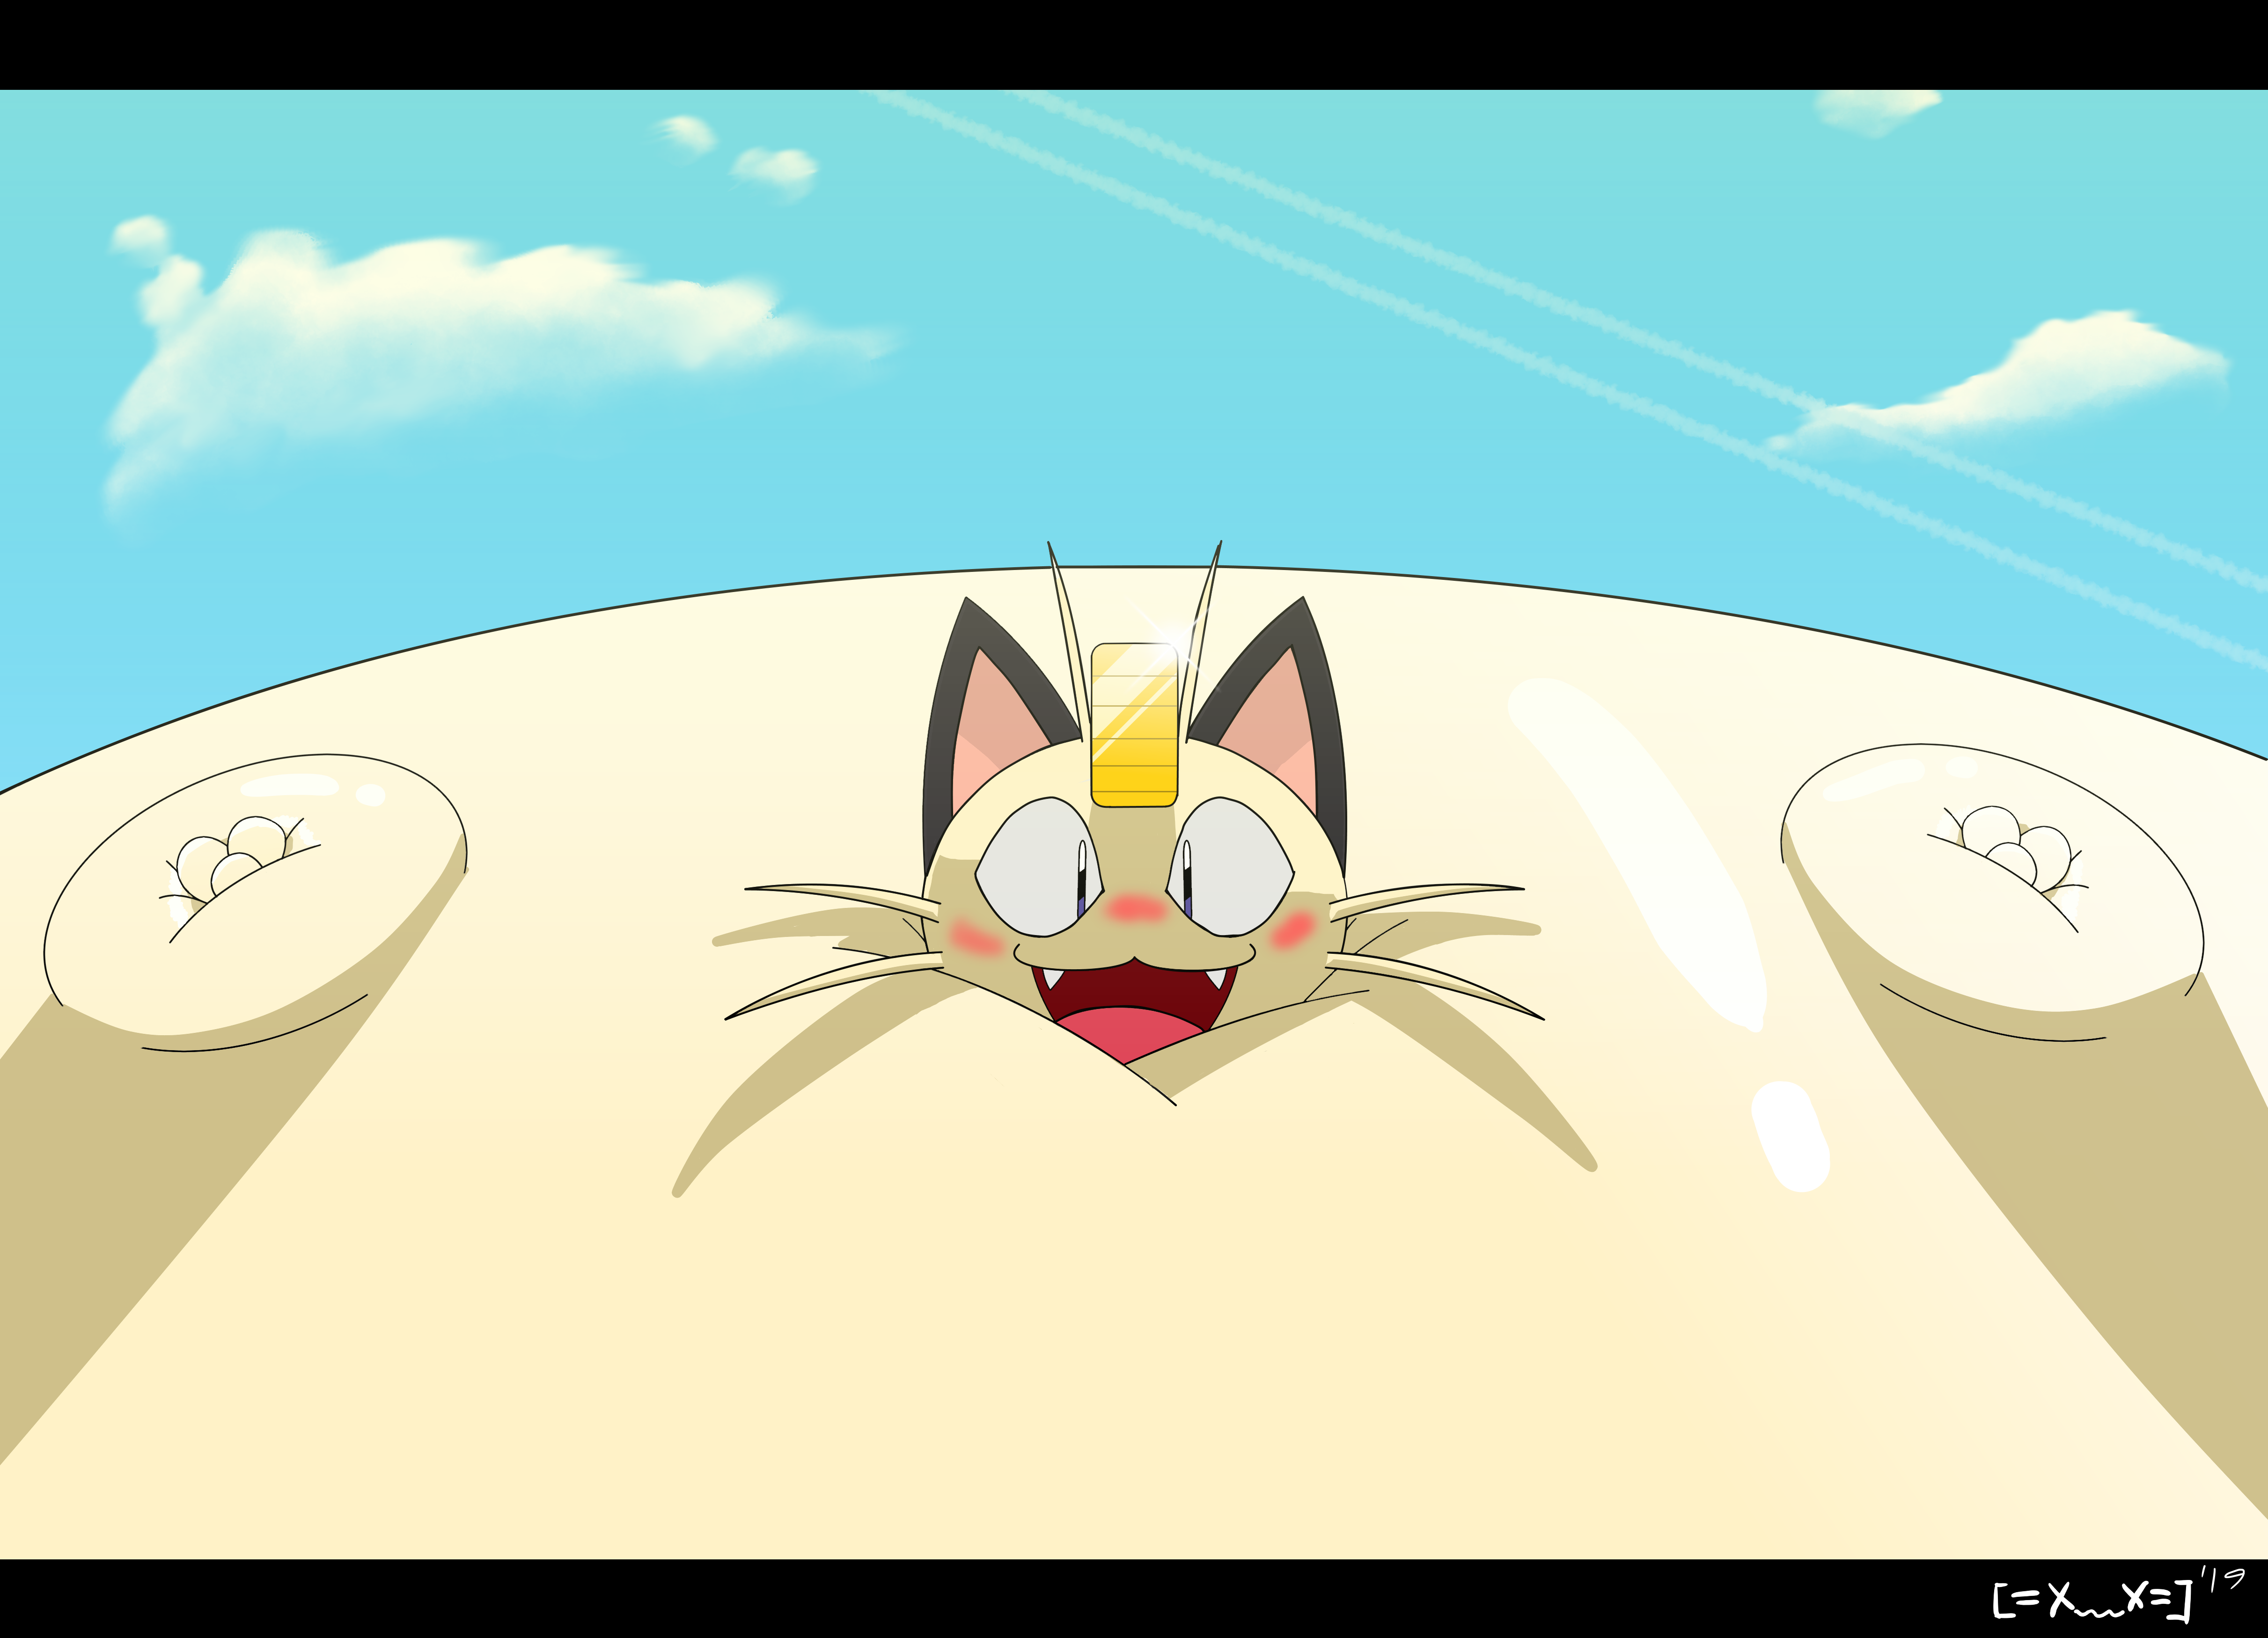 Meowth inflation